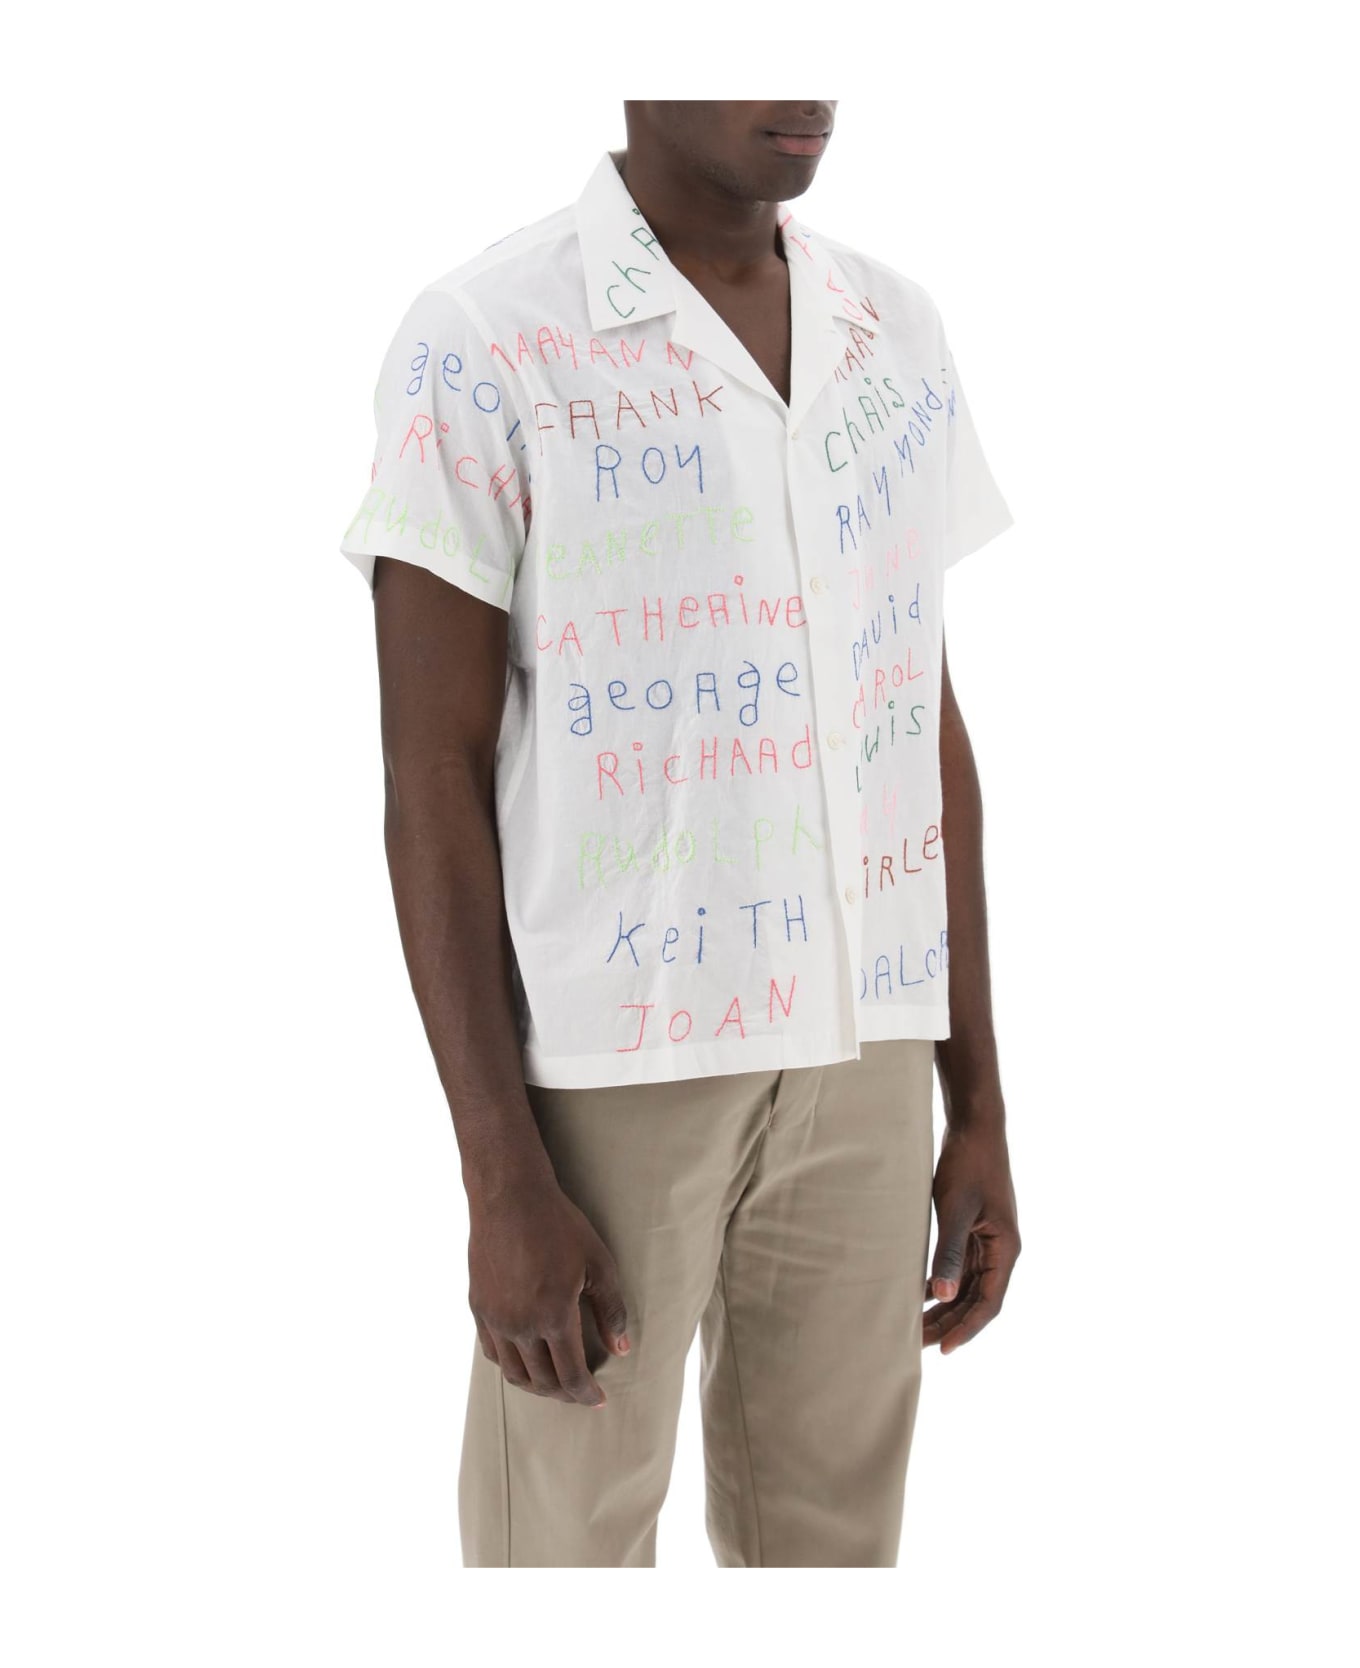 Bode Familial Bowling Shirt With Lettering Embroideries - WHITE MULTI (White)